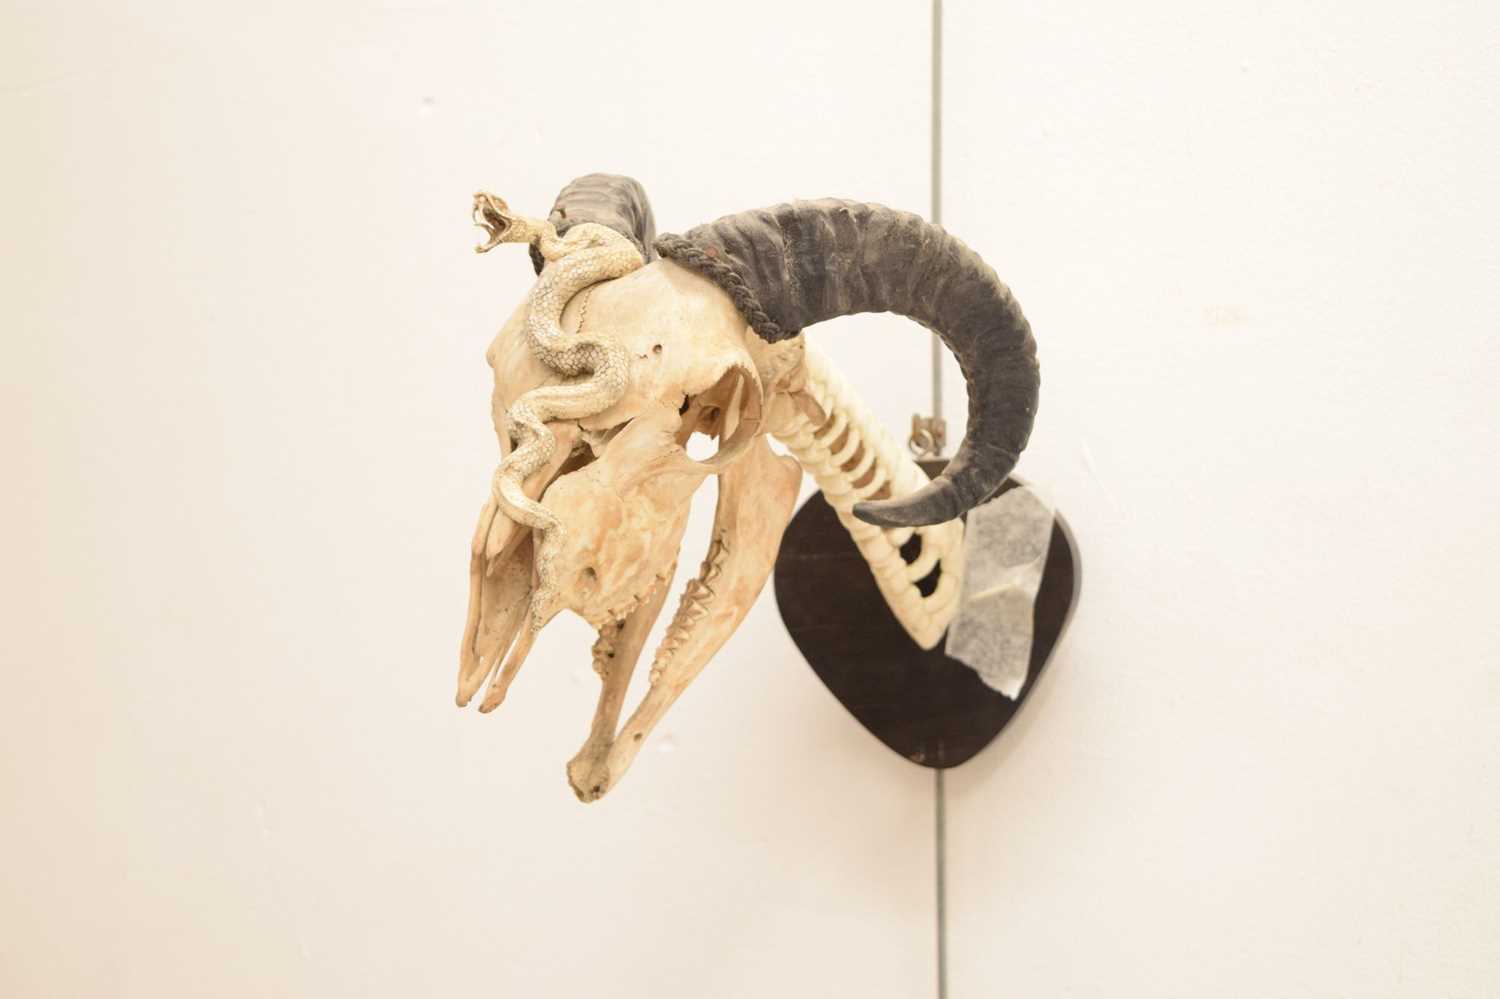 Mounted ram's head skull with snake - Image 5 of 11